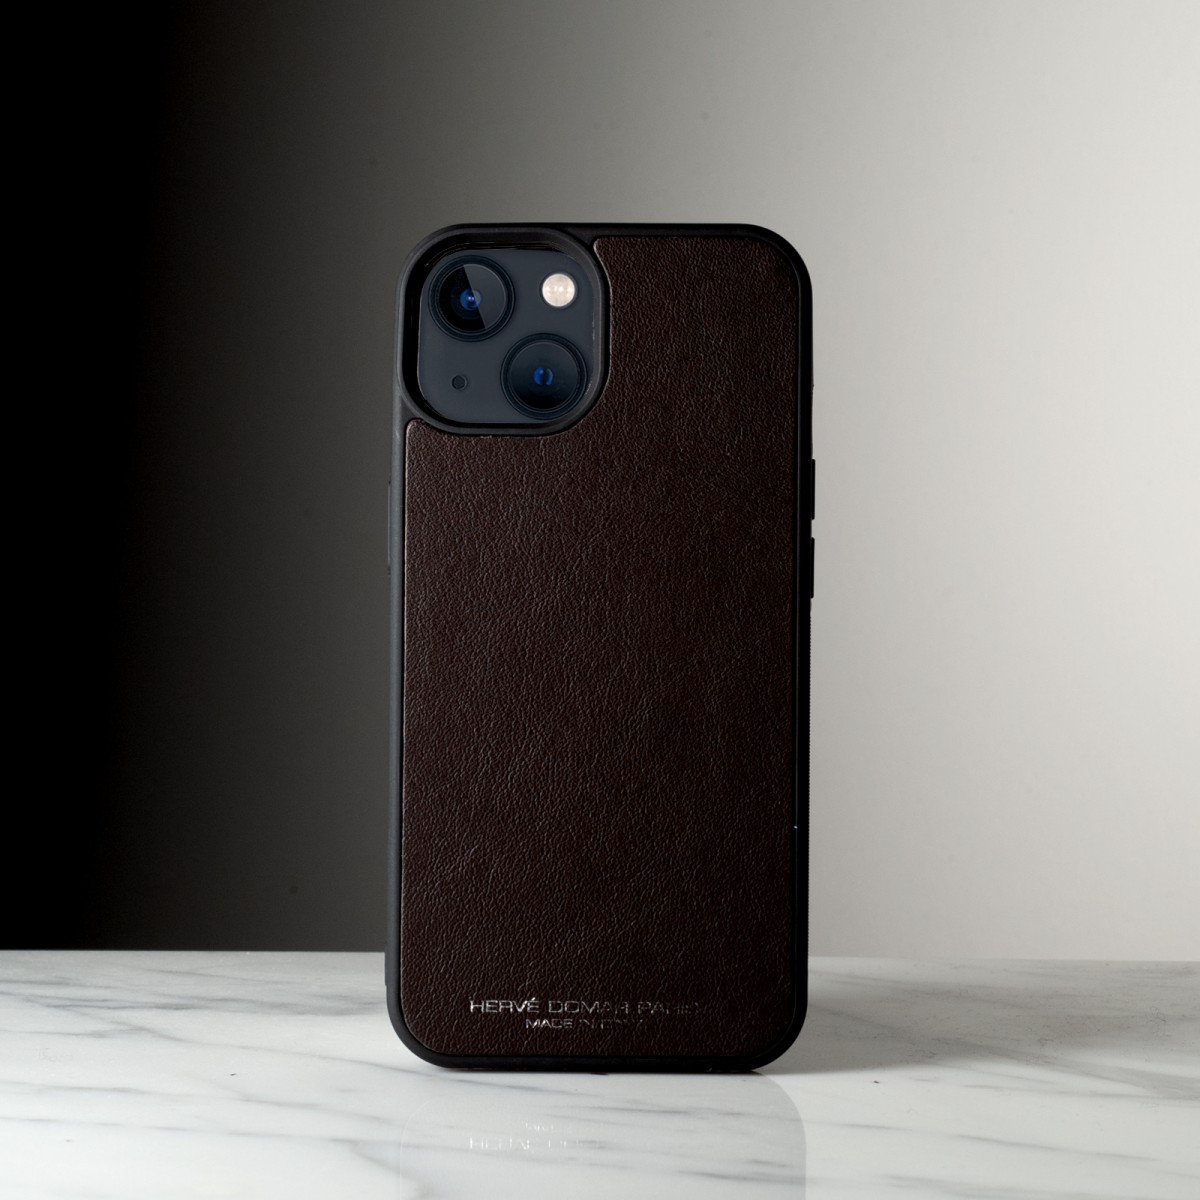 IPHONE 13 CASE - Handcrafted leather iPhone case made in Italy